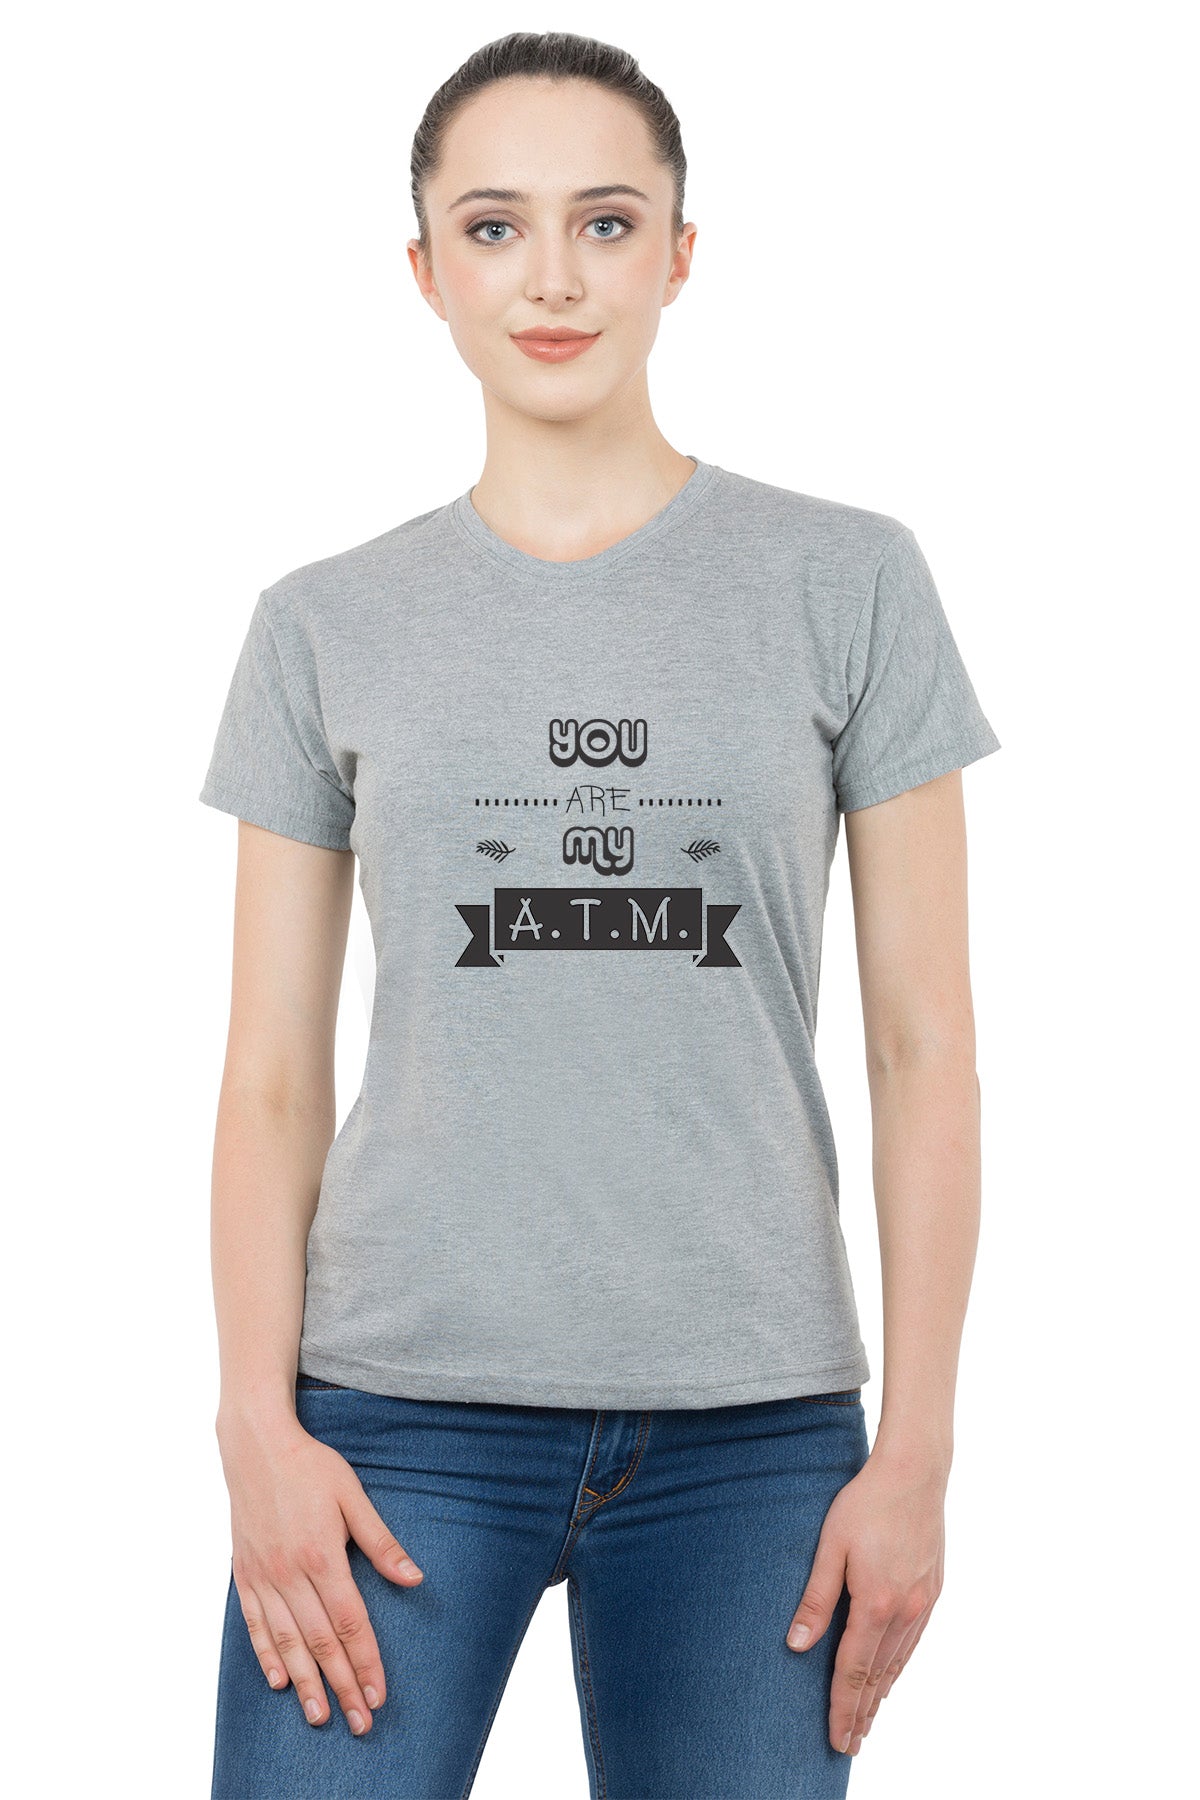 COOK ATM matching Couple T shirts- Grey